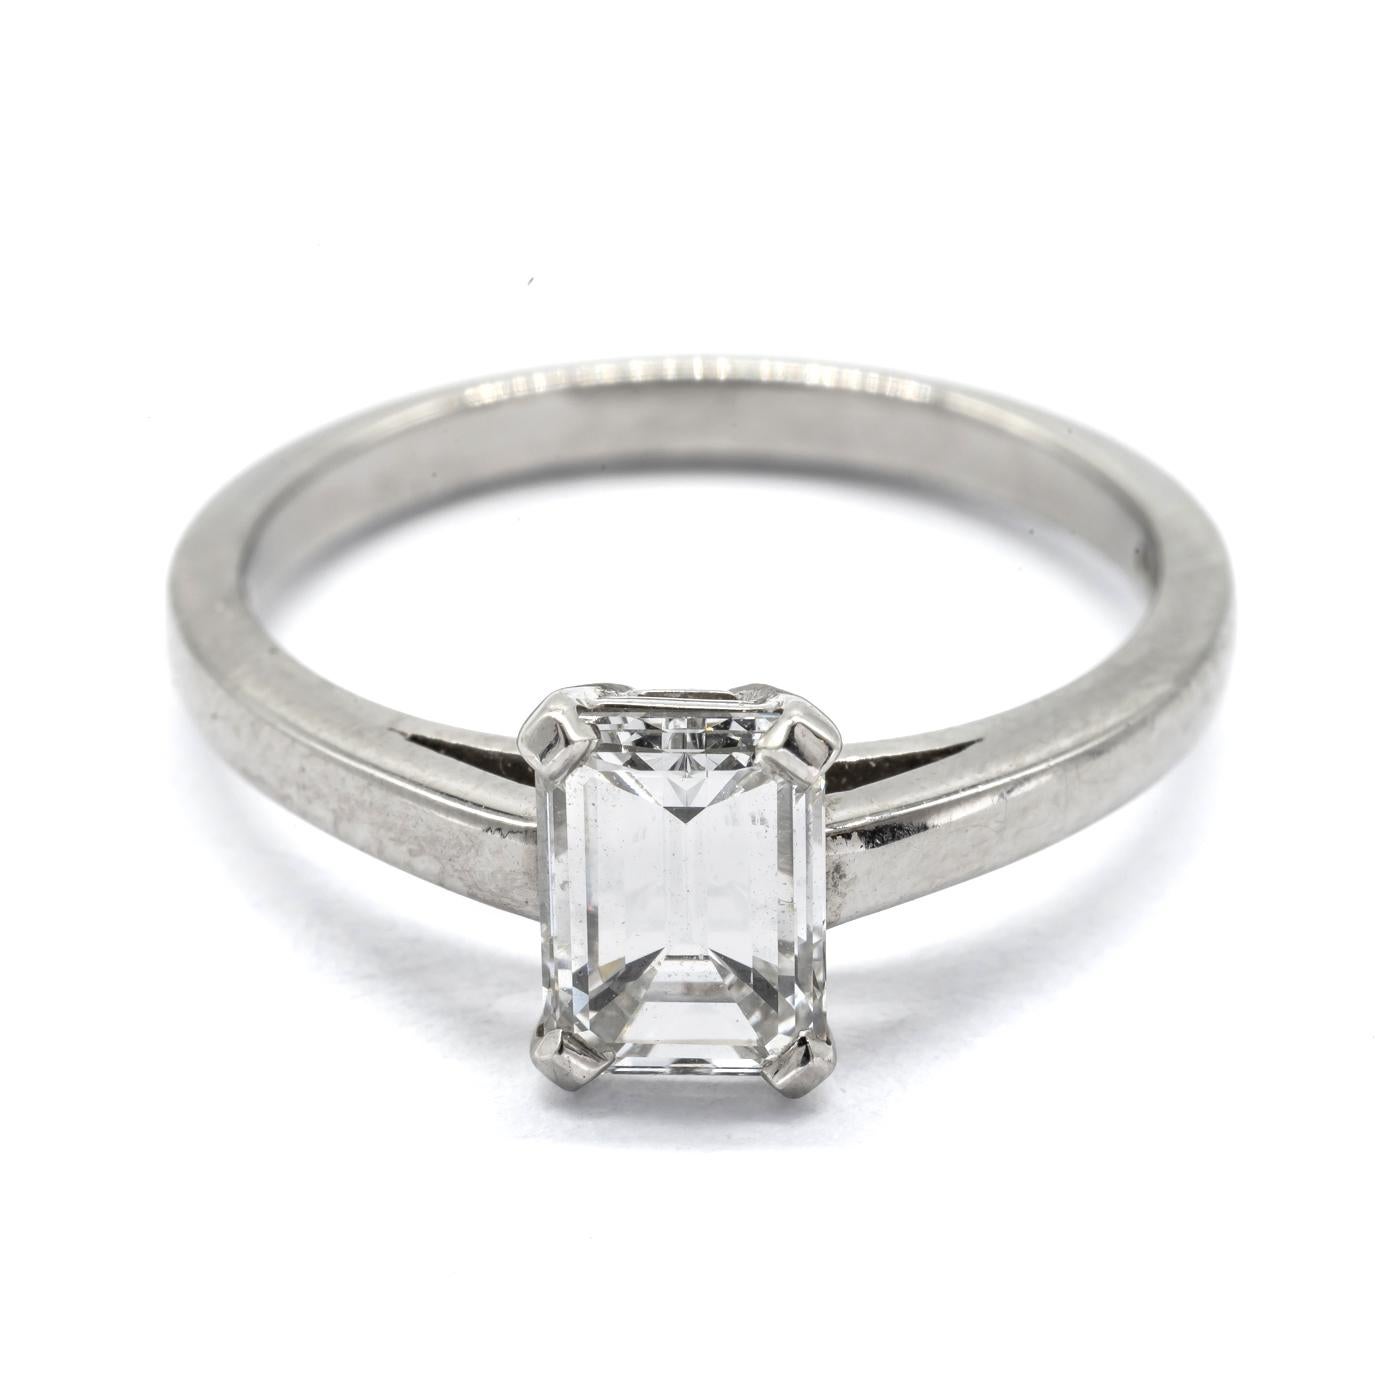 A solitaire diamond ring, set with a 0.90ct F, VVS1 emerald-cut diamond, mounted in platinum, accompanied by a GIA certificate